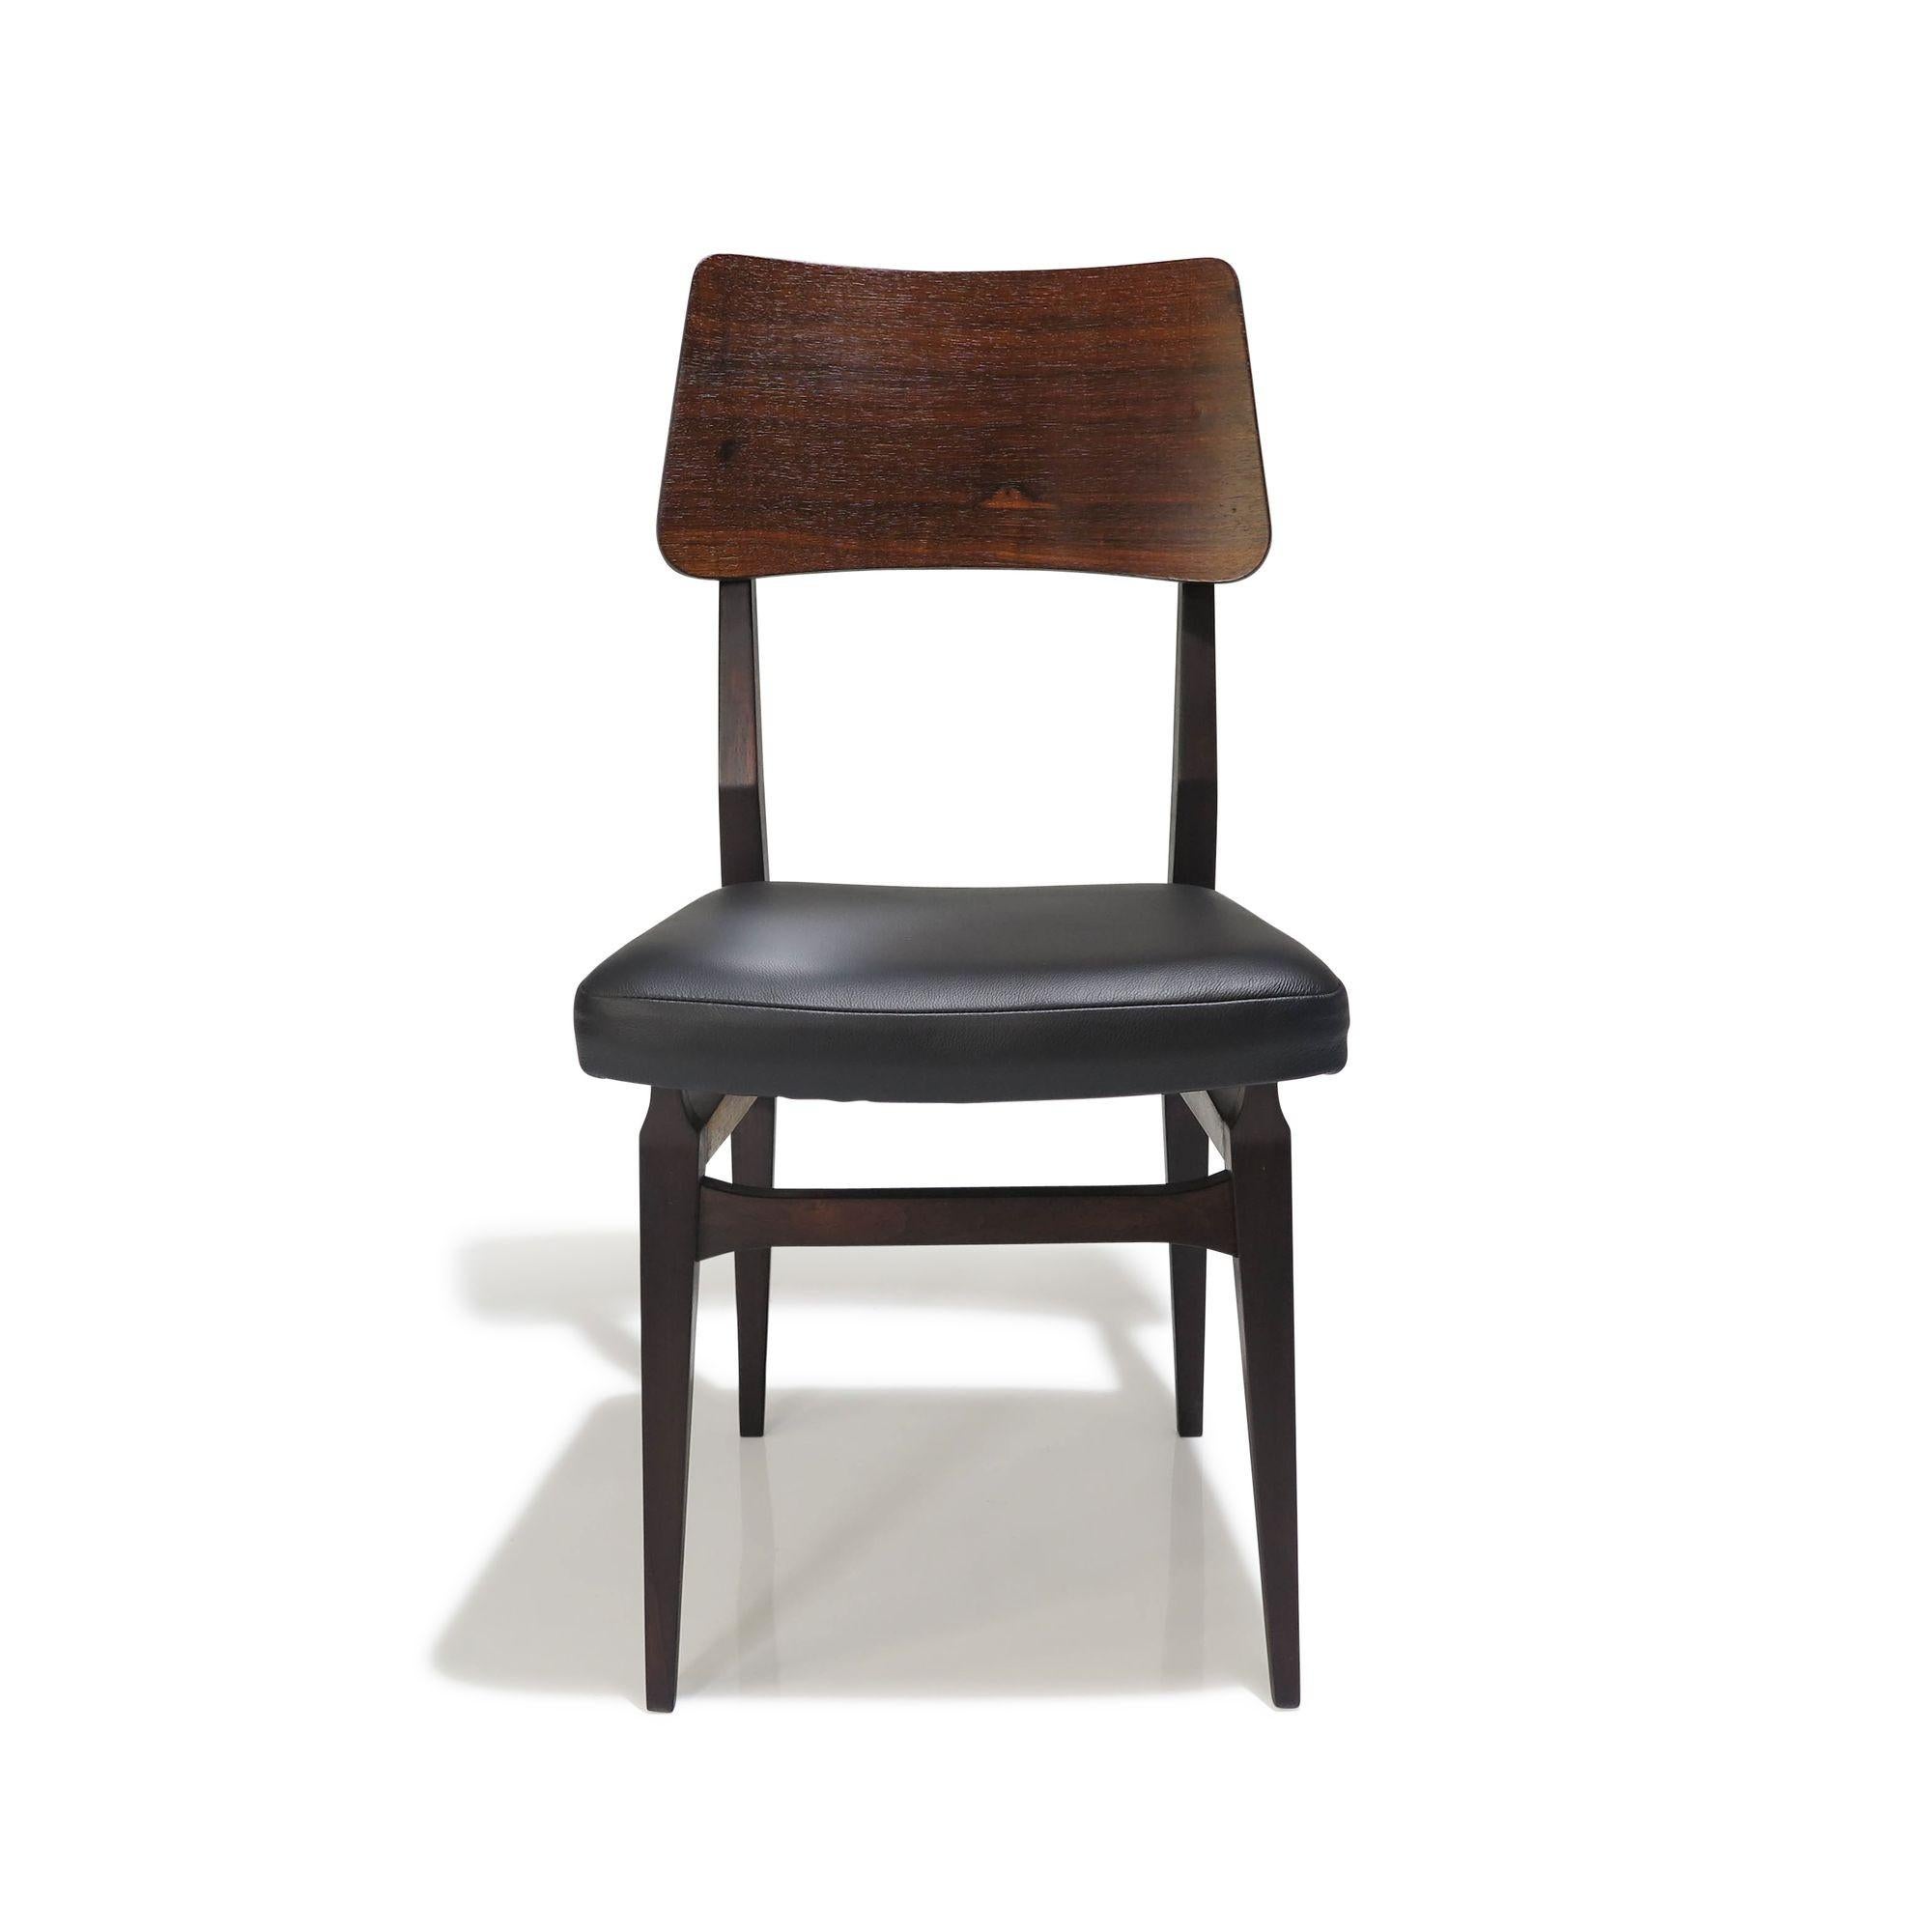 Brazilian rosewood dining chairs by Forma Móveis e Objetos de Arte, 1957, Brazil. In the manner of Carlo Hauner and Martin Eisler, this set of six vintage dining chairs is crafted from solid rosewood, featuring newly upholstered seats in black